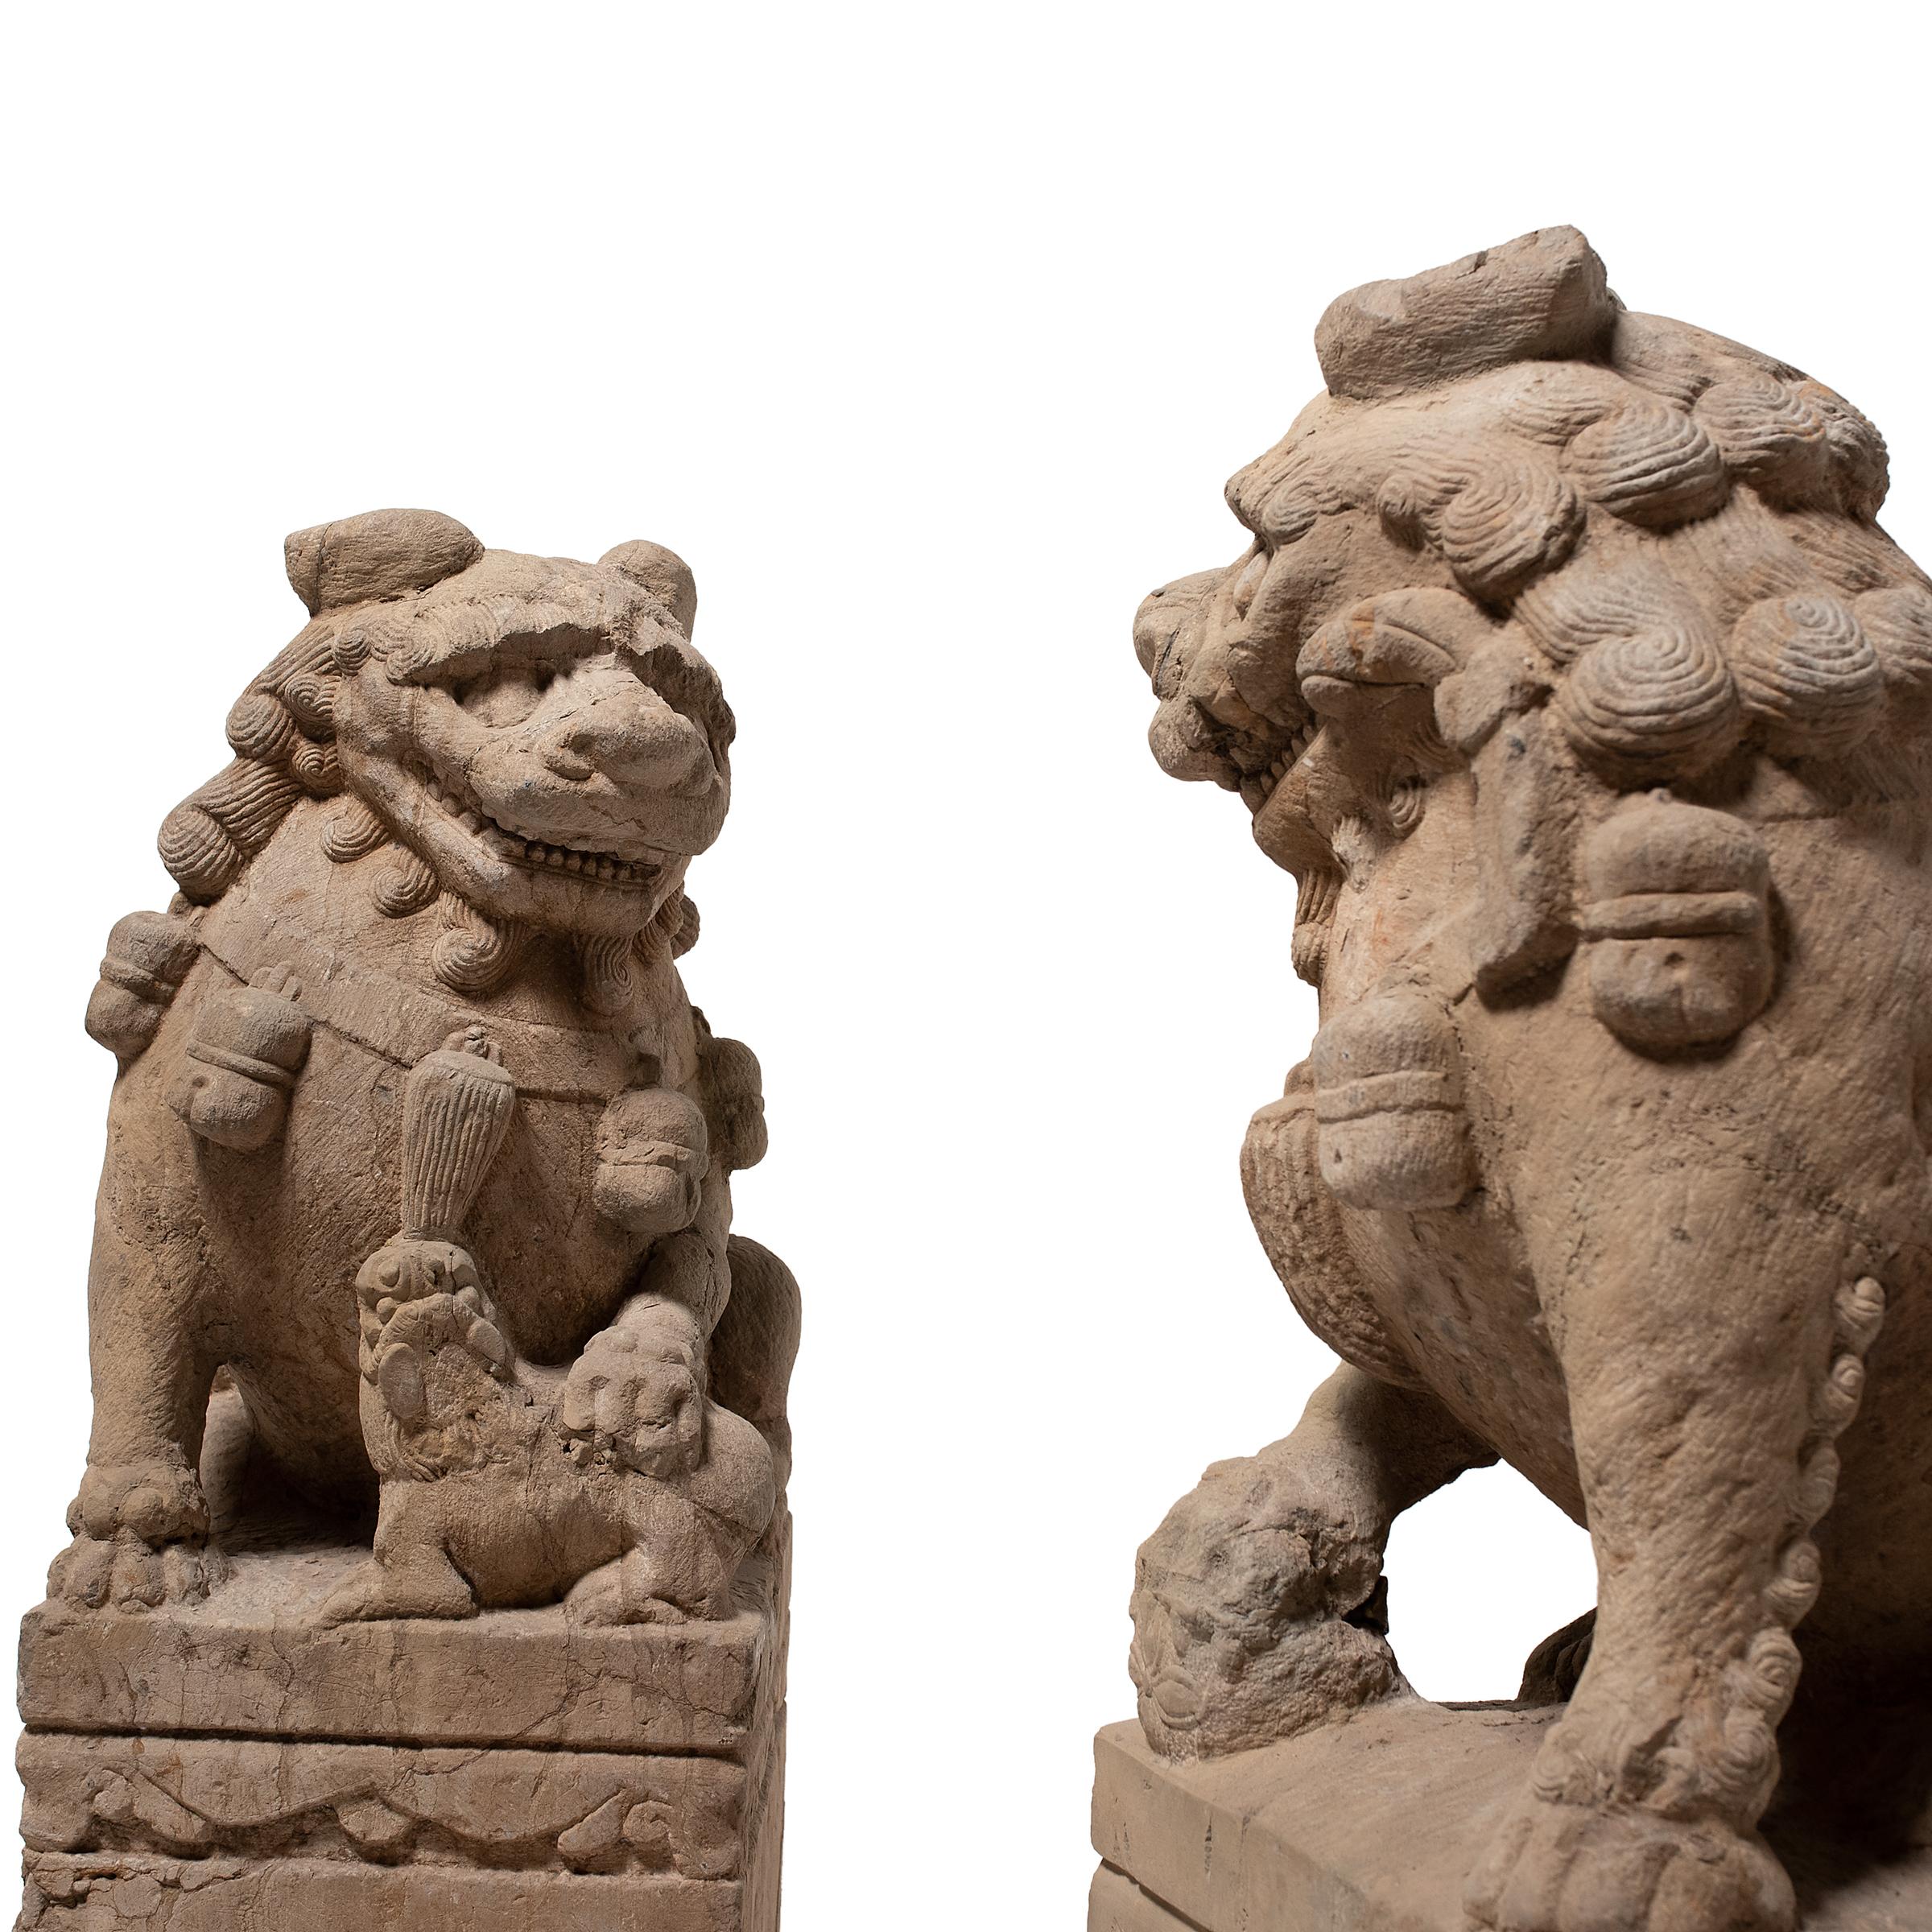 This pair of monumental Fu-Lions, also known as shizi, once would have flanked the entrance to a Qing-dynasty home in China’s Shanxi province. One has a pearl under its foot, and the other has a lion cub. Shizi were believed to be powerful